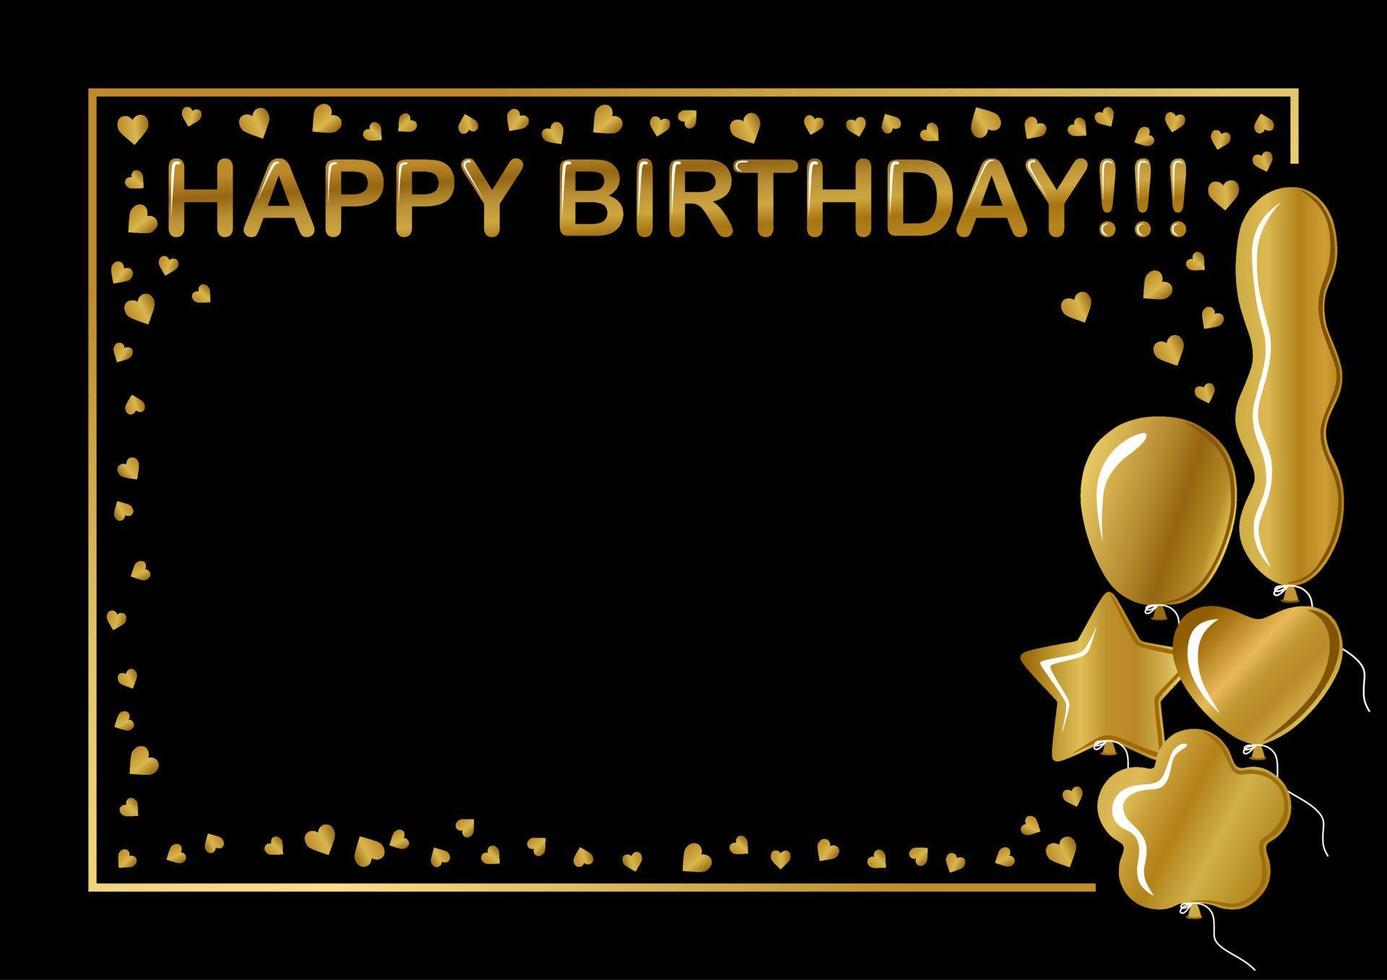 Happy Birthday card. Gold balloons and confetti. Gold frame. Isolated on dark black background. Different shapes of balloons. vector